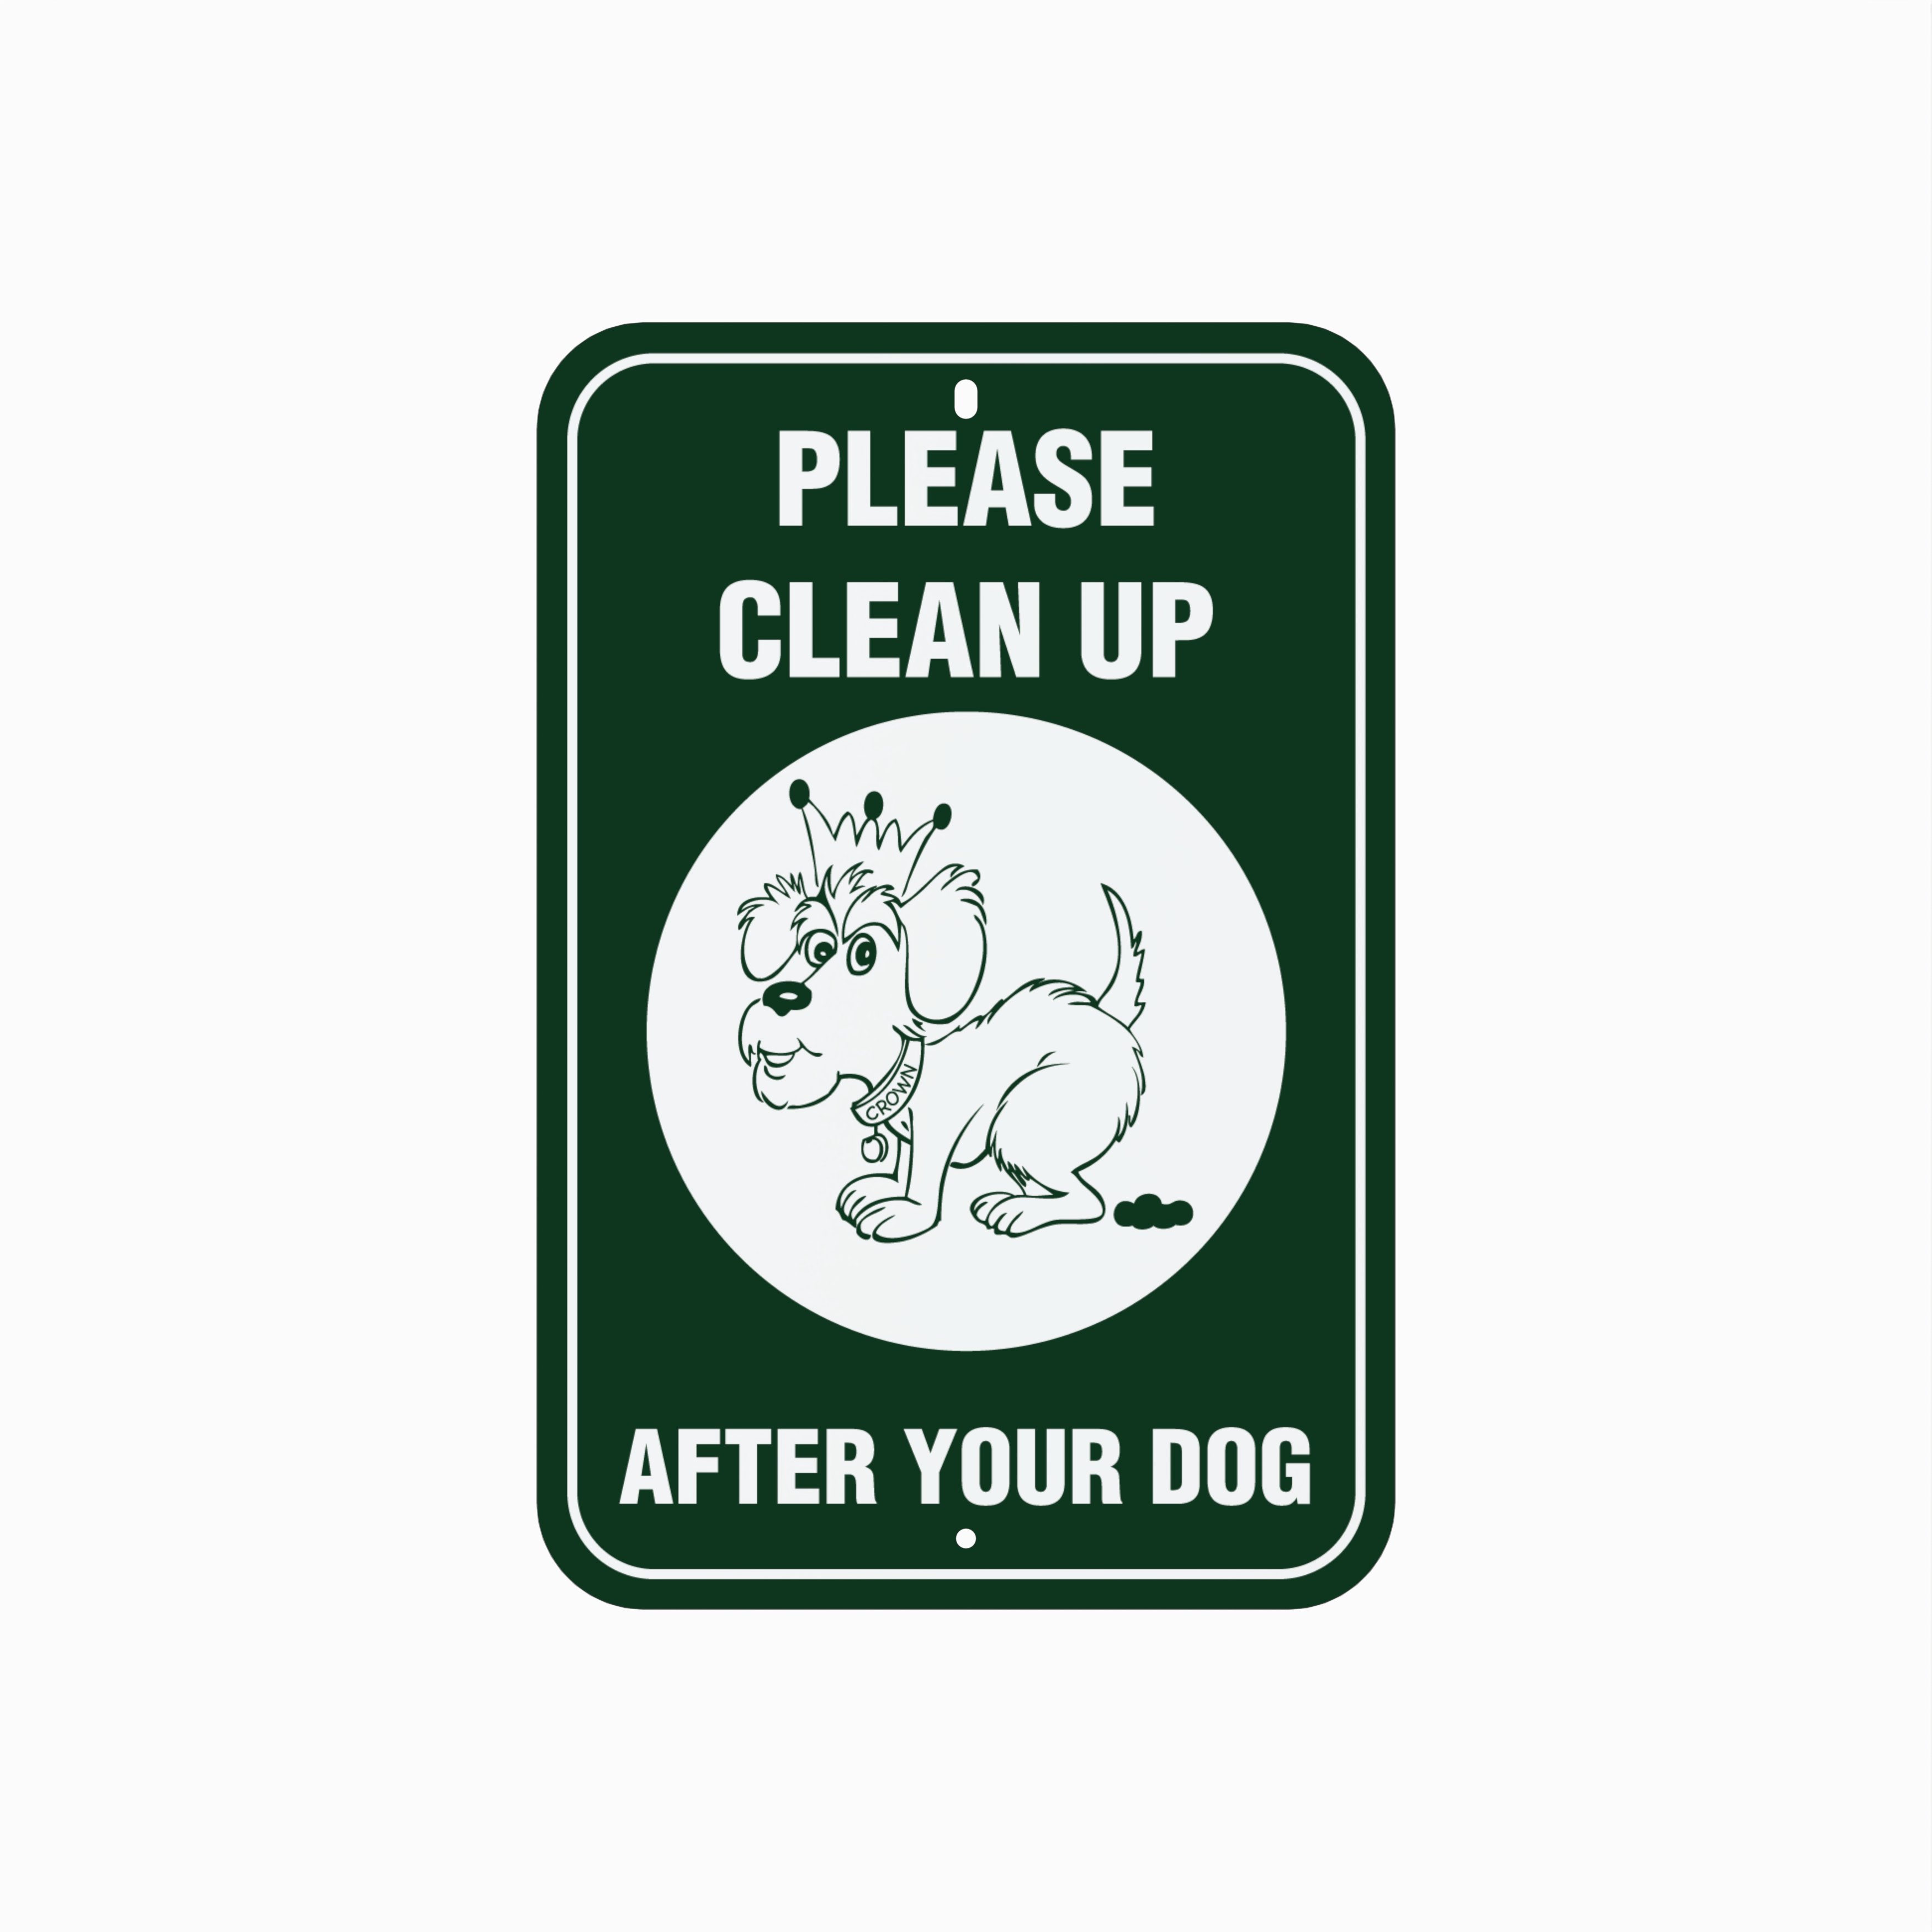 Poopy Pouch “Please Clean Up After Your Dog” Sign